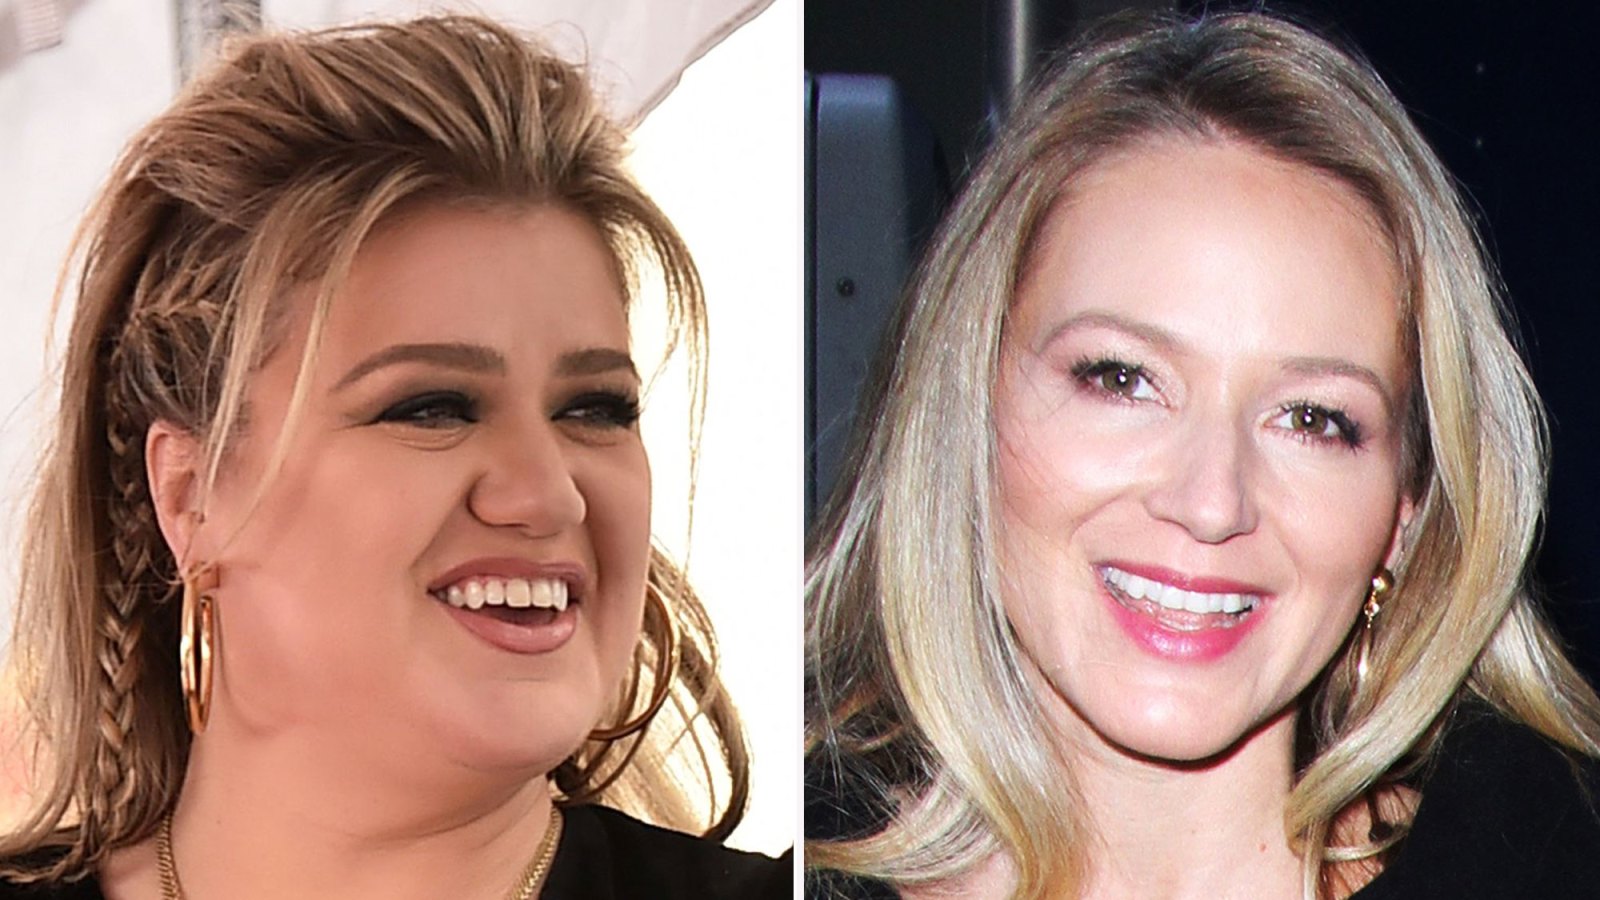 Jewel and Kelly Clarkson Bond Over Being Single Moms at the Holidays: ‘It’s Weird’